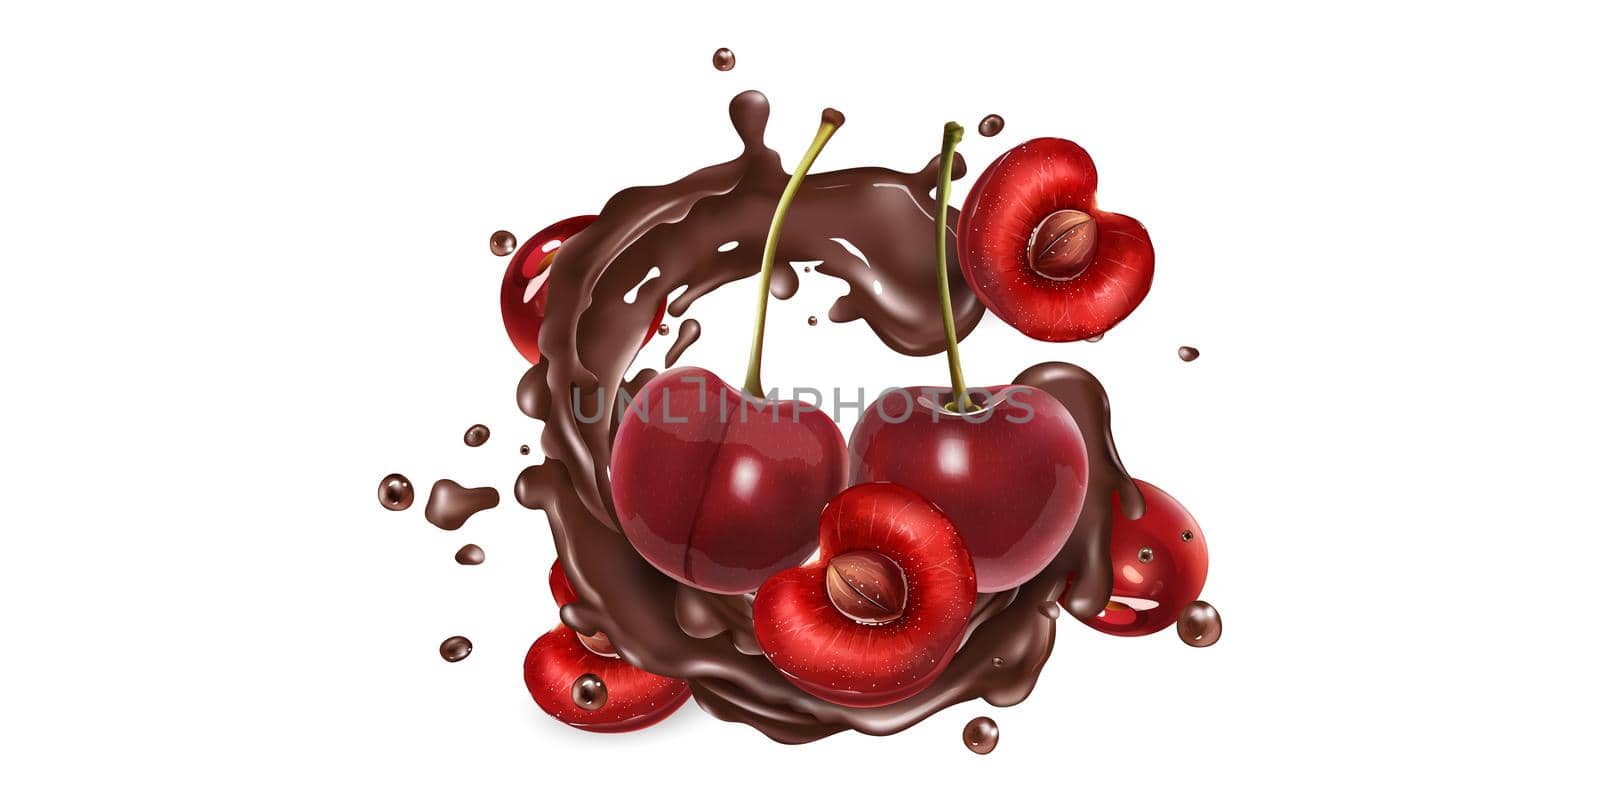 Whole and sliced cherries in chocolate splashes on a white background. Realistic style illustration.